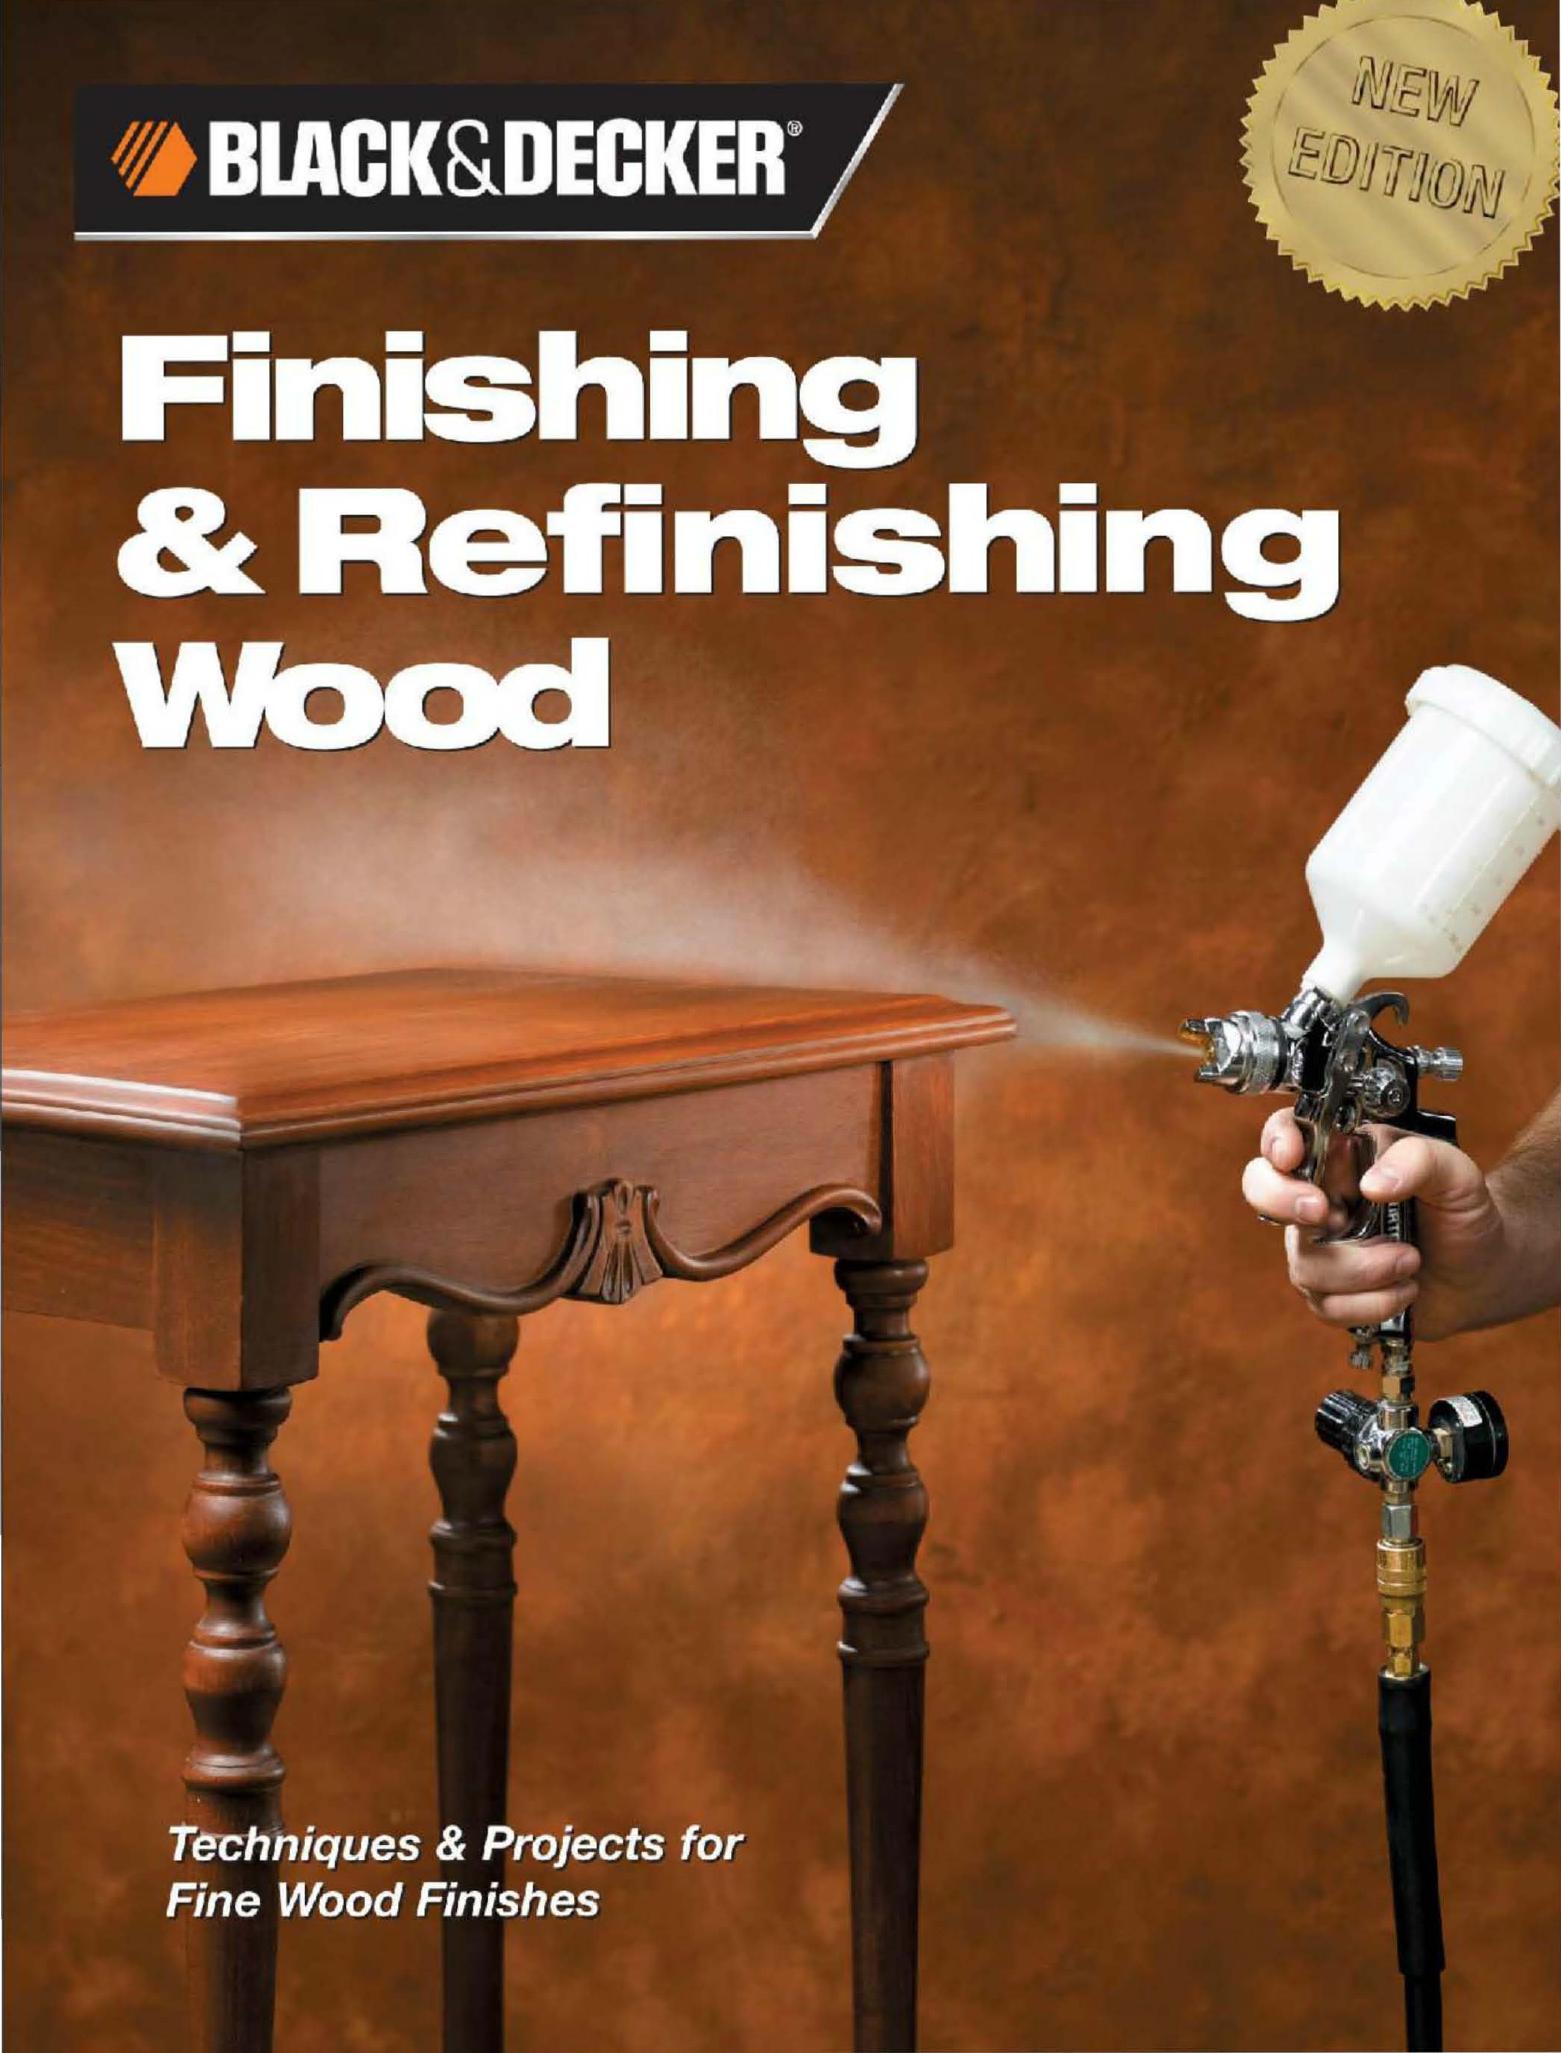 Finishing & refinishing wood techniques & projects for fine wood finishes  2006